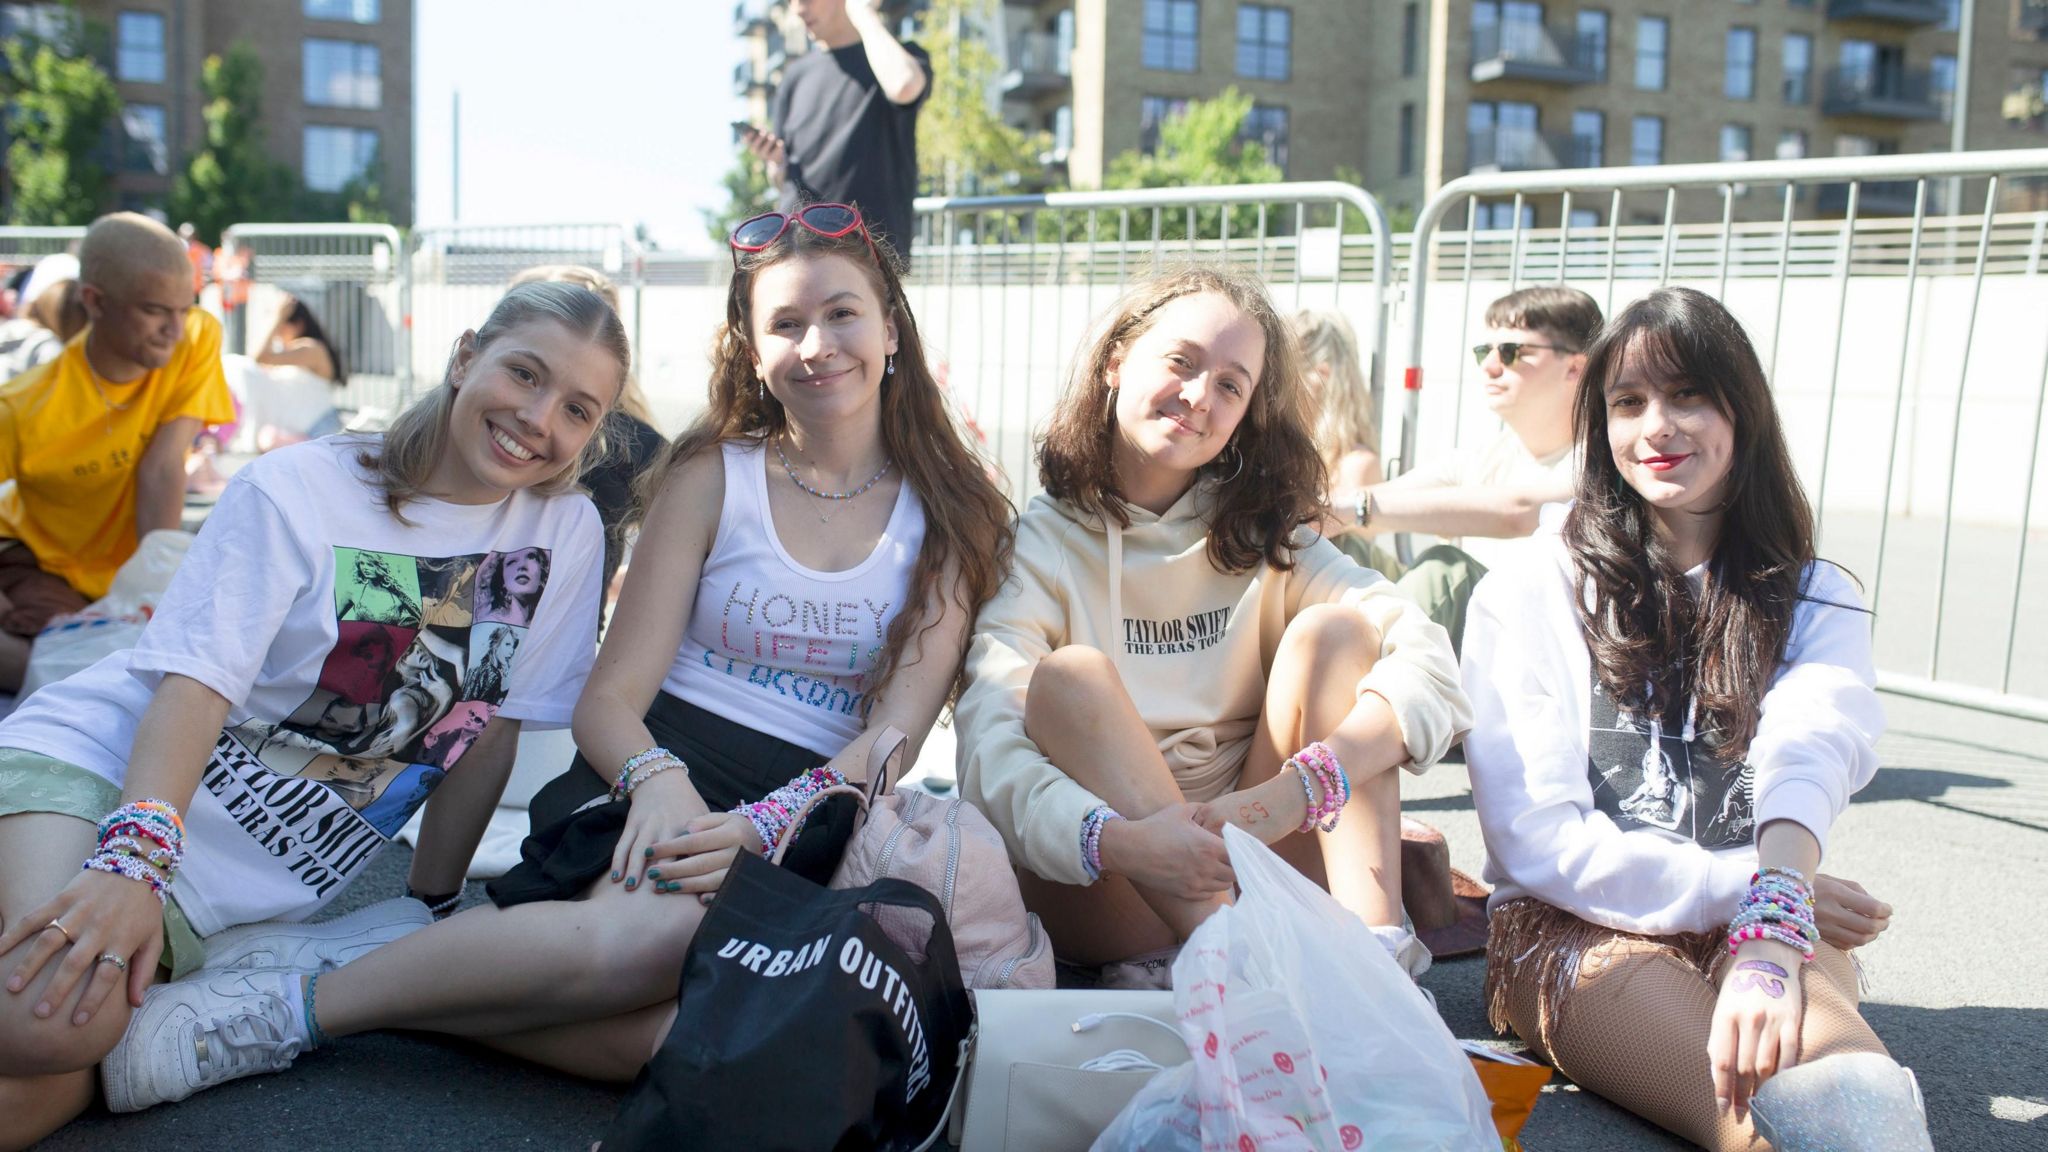 Taylor Swift fans Izzie, 18, Sophia, 19, Taylor, 19, and Mary, 27, pose for a photo as they wait to enter Wembley Stadium in London,